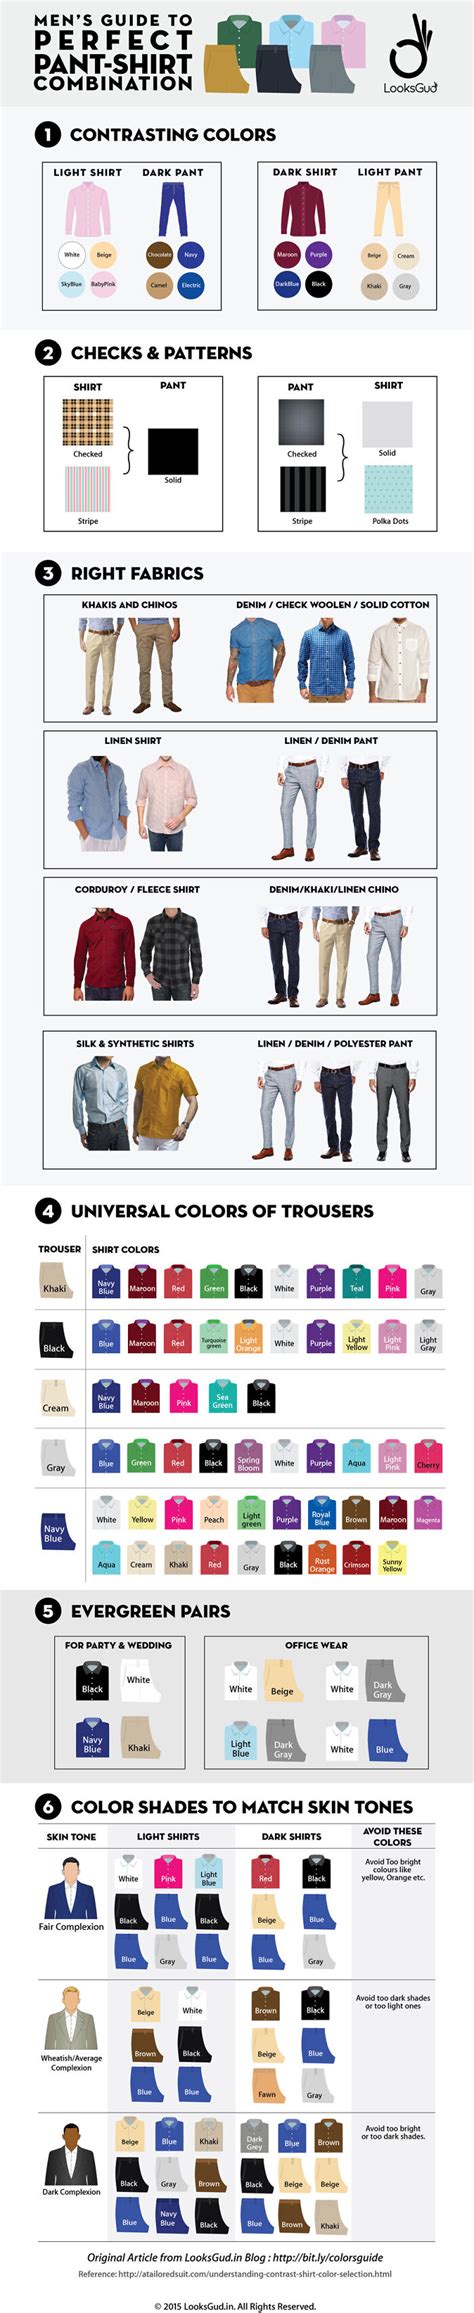 The Perfect Guide To The Perfect Pant Shirt Combination Daily Infographic